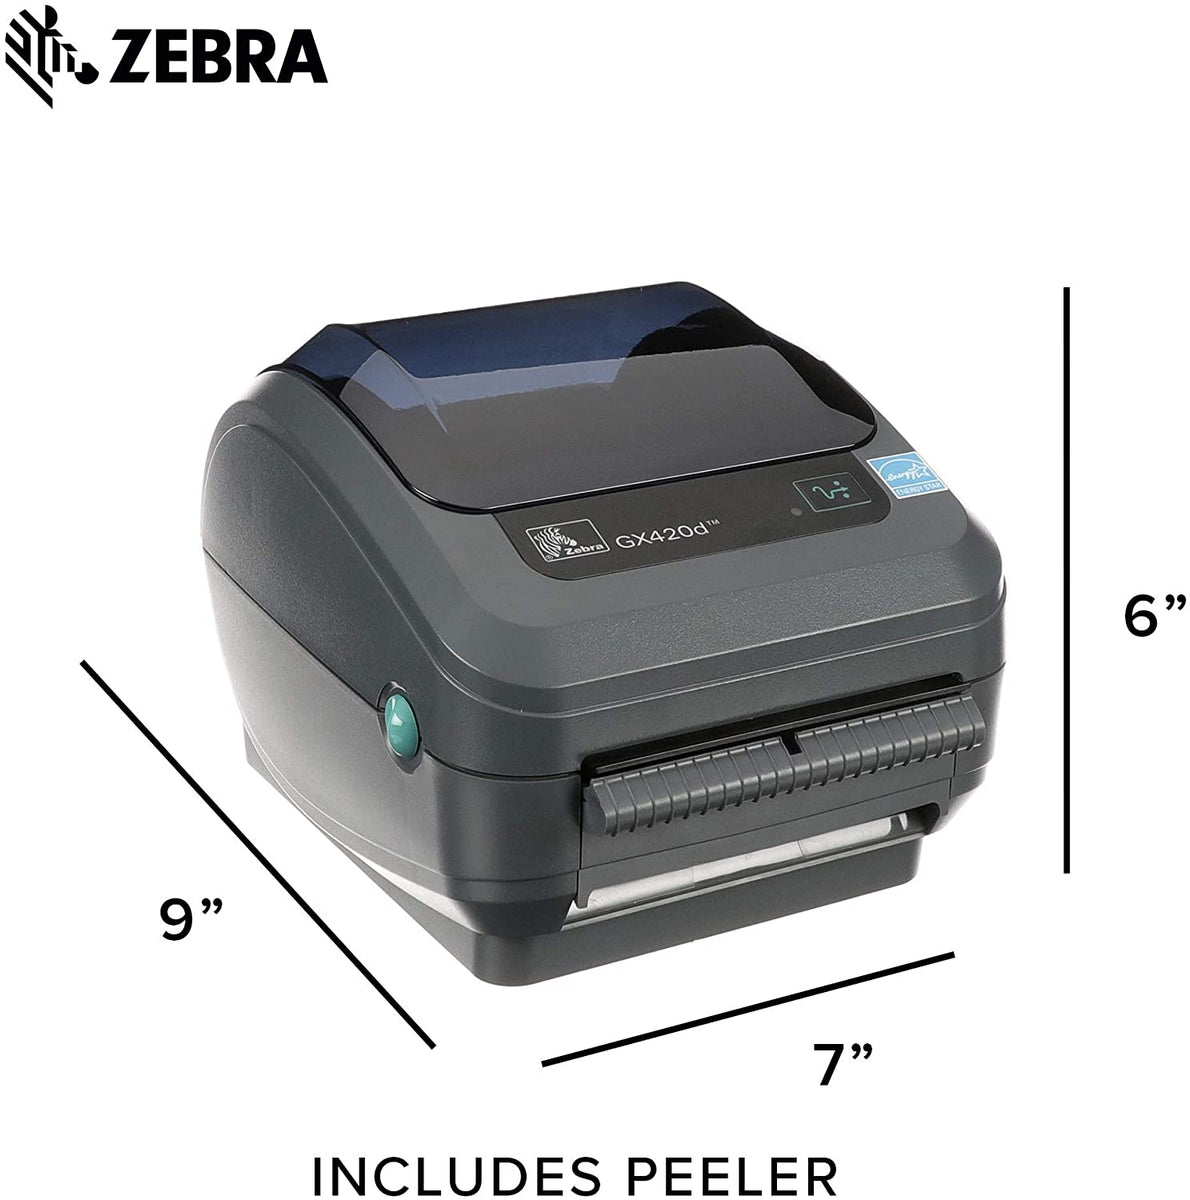 Zebra GX420d Direct Thermal Desktop Printer Print Width of in USB Serial and Ethernet Port Connectivity Includes Peeler GX42-202411-000 - 2